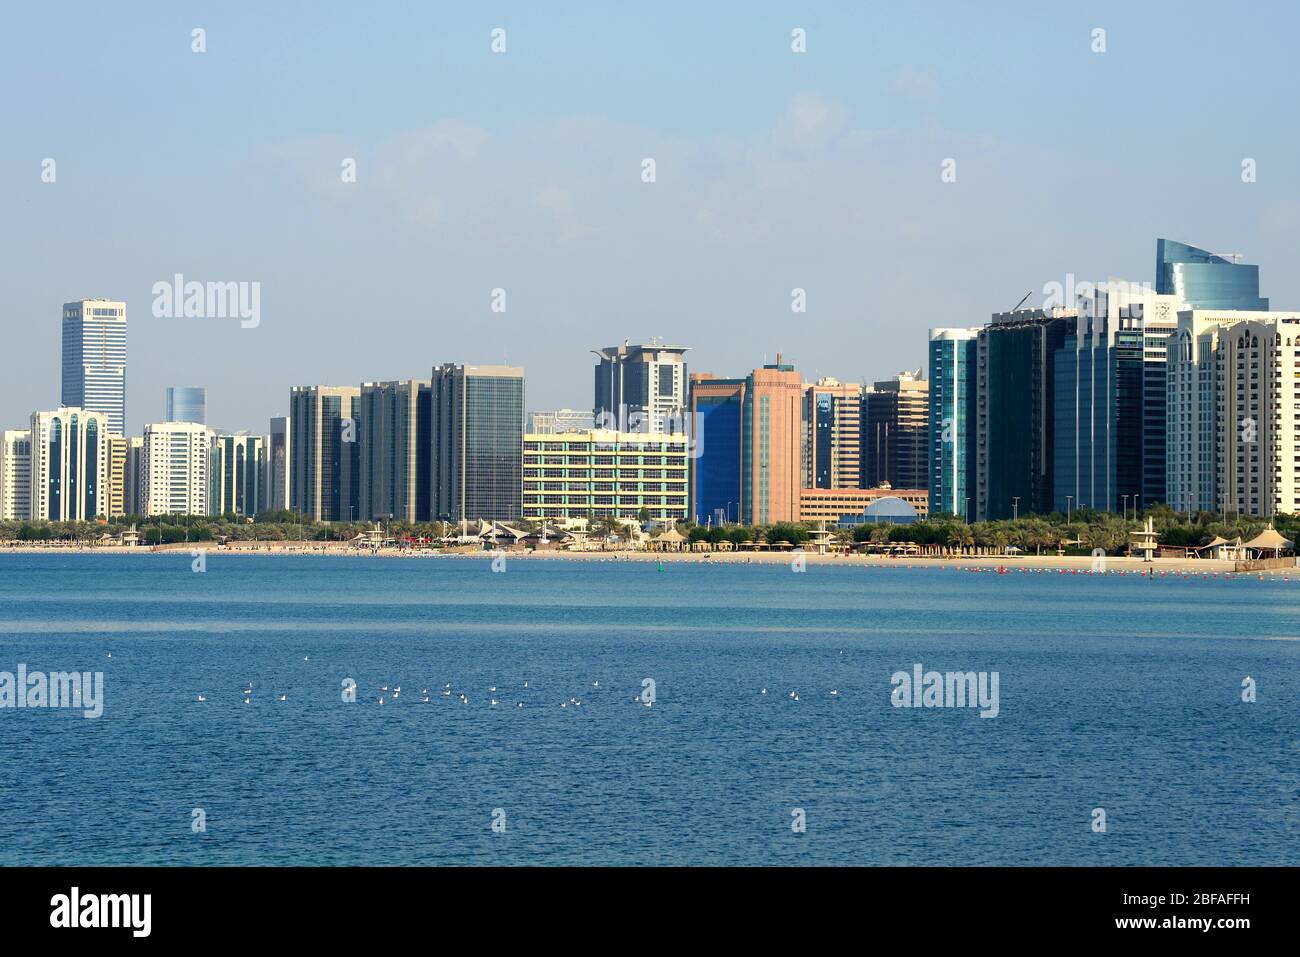 Skyline of Abu Dhabi, United Arab Emirates with multiple skyscrapers. Multiple modern buildings with mirrored glass in the Corniche. Stock Photo